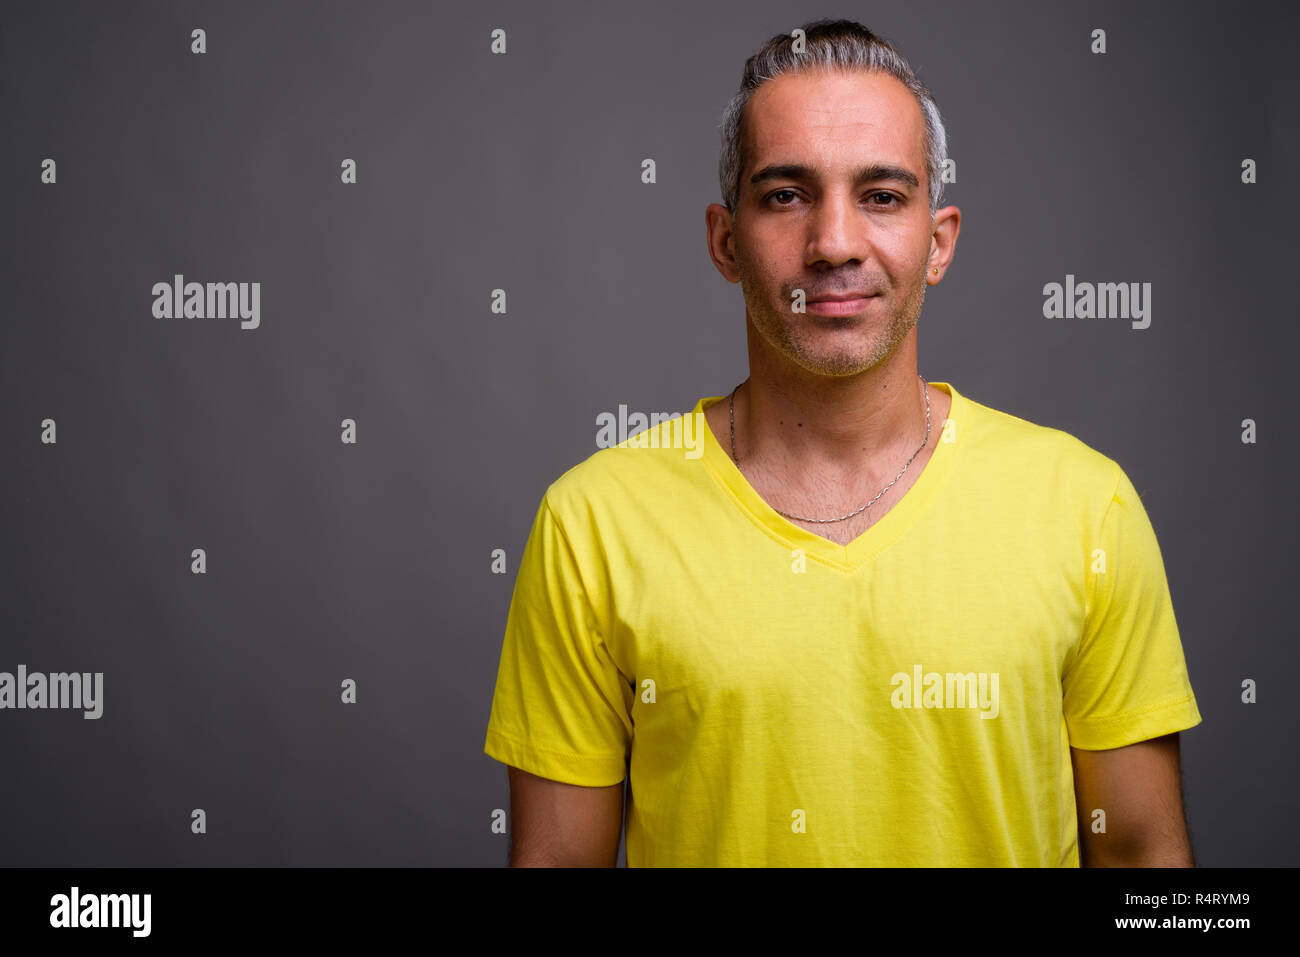 Handsome Persian man with gray hair wearing yellow t-shirt Stock Photo